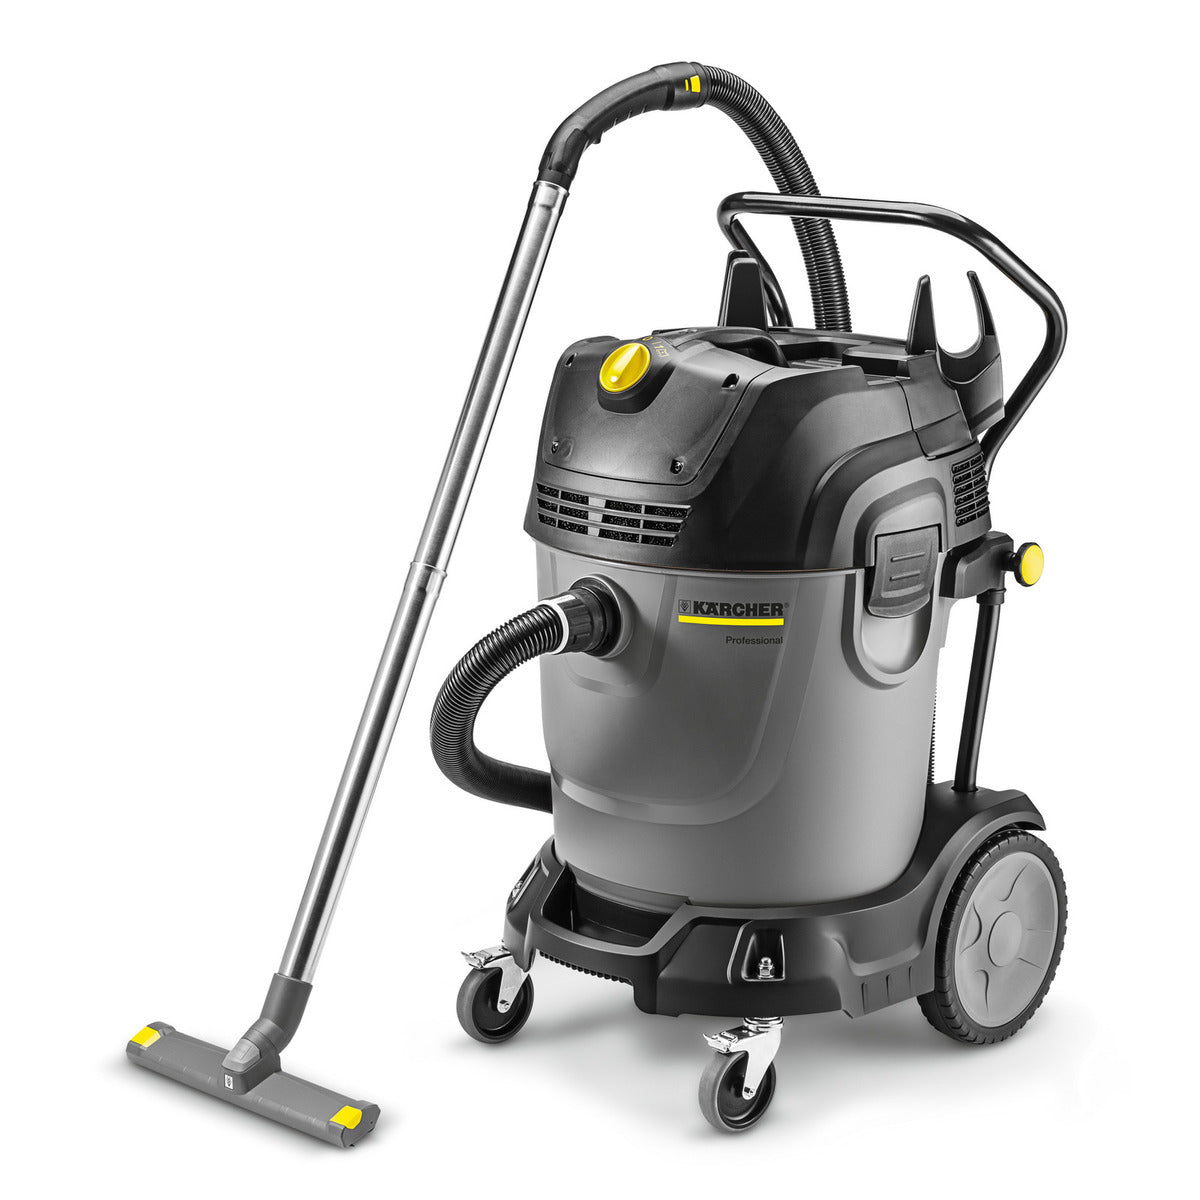 Kärcher wet and dry vacuum cleaner NT 65/2 Tact²